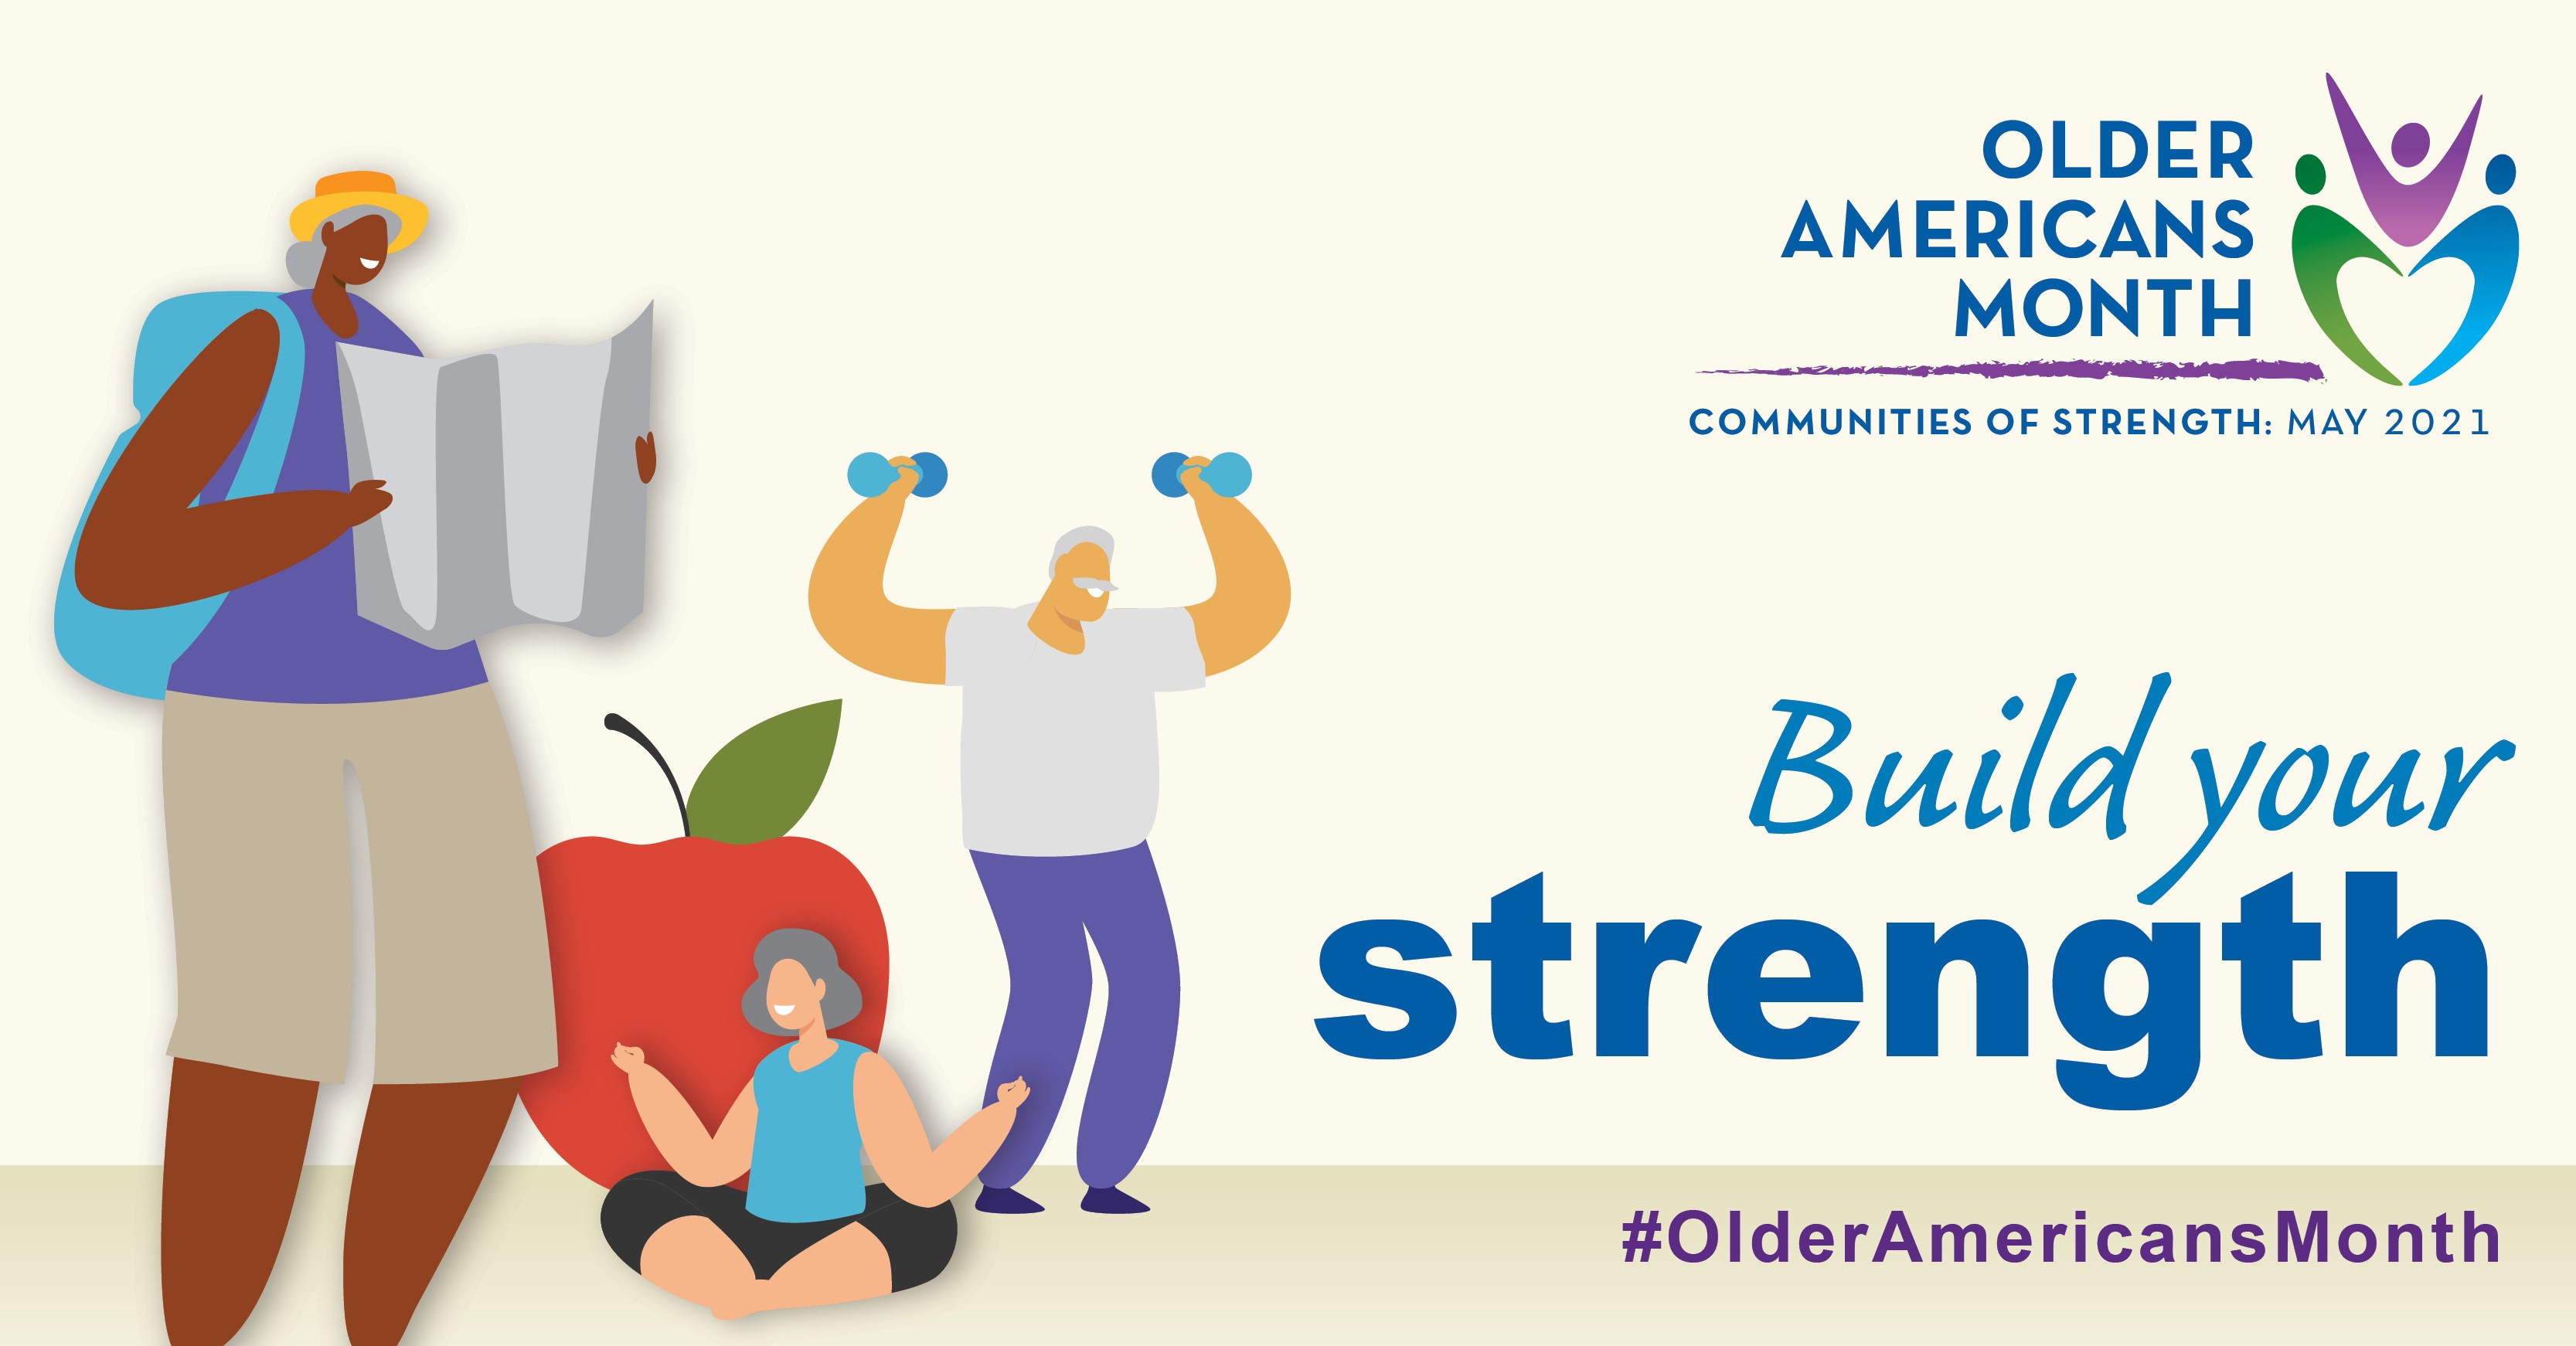 Older Americans Month, Communities of Strength, May 2021. Build your strength. #OlderAmericansMonth